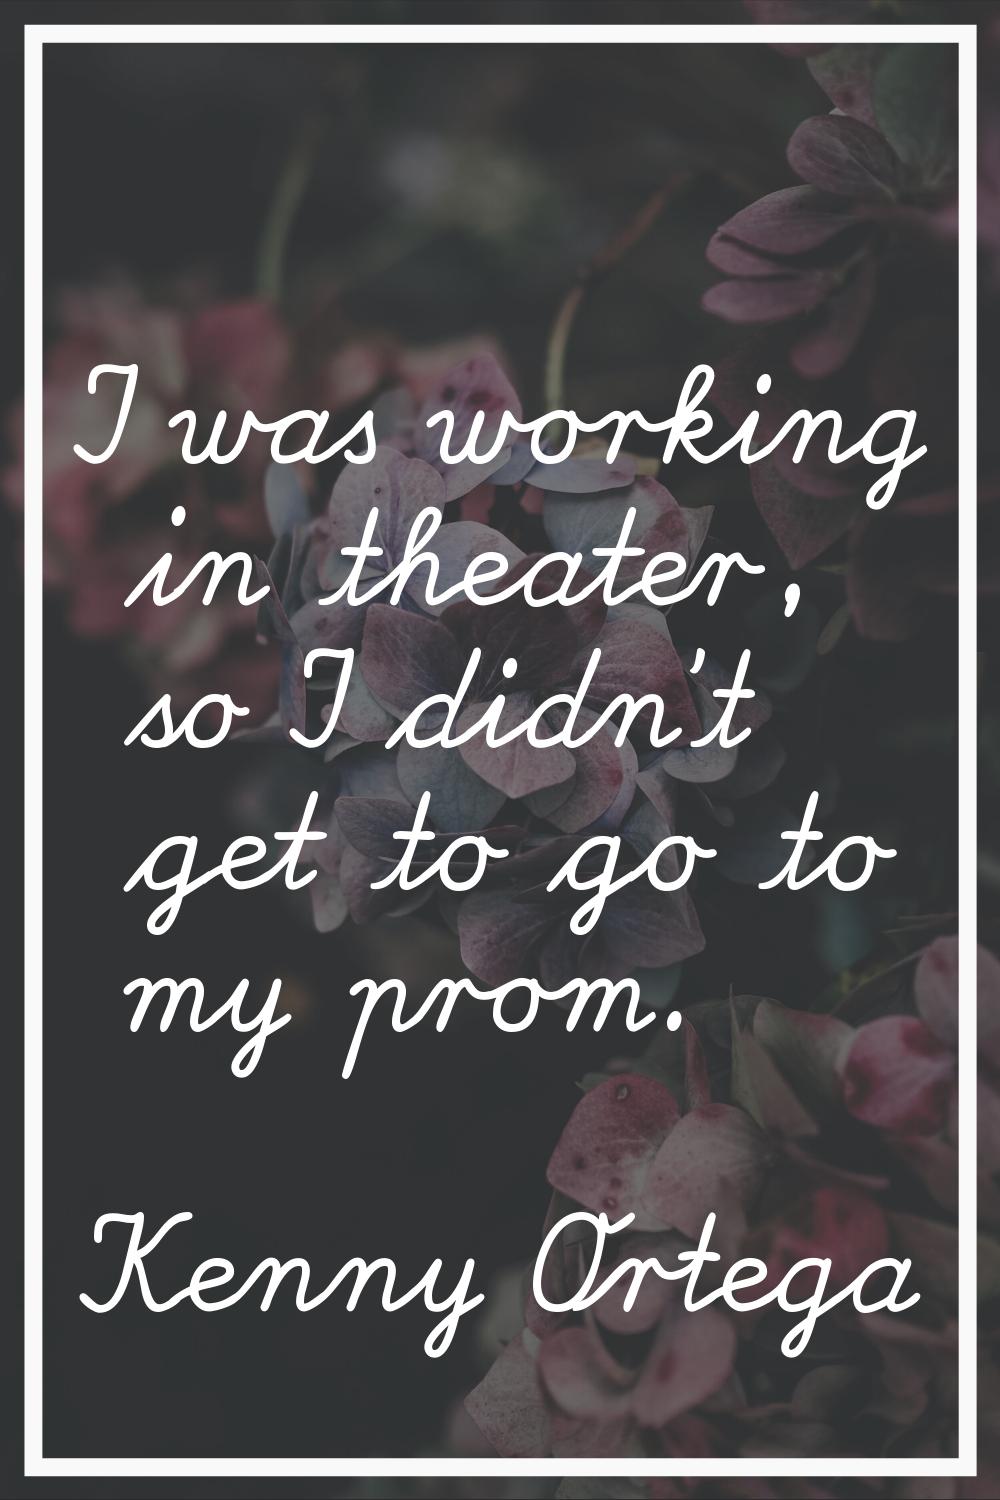 I was working in theater, so I didn't get to go to my prom.